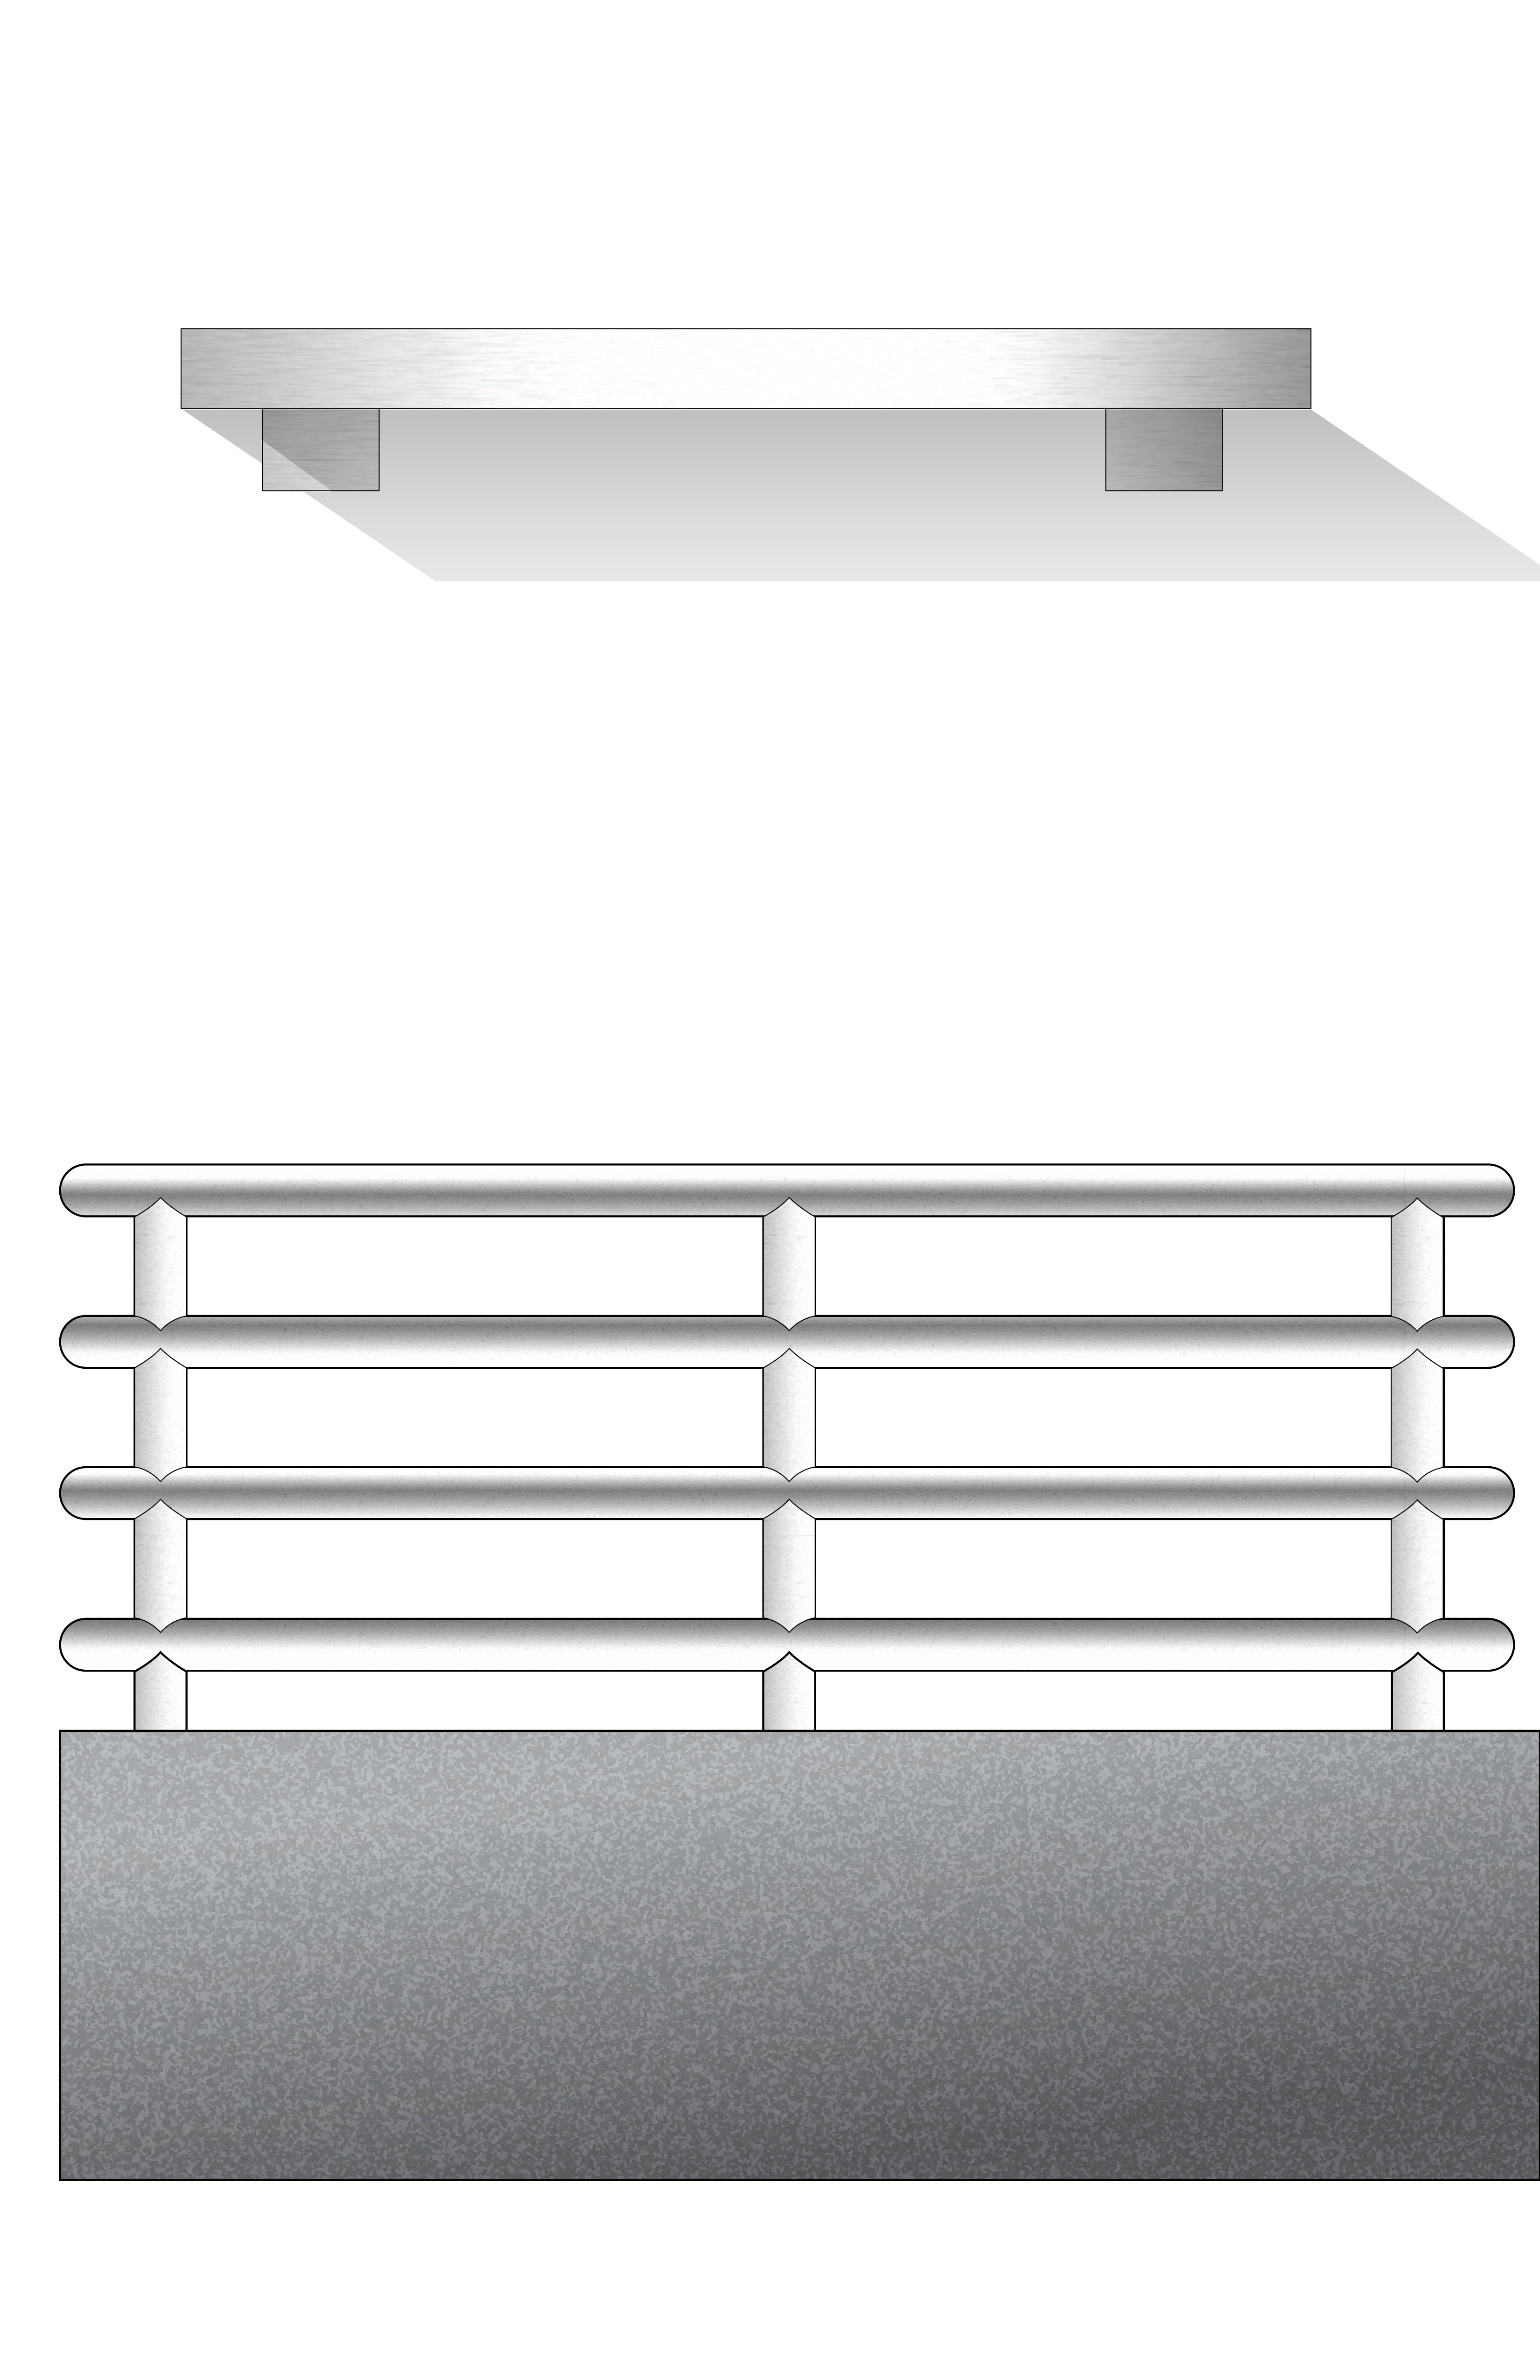 Old work - quick style demonstrator to show how to quickly fake a brushed steel look in illustrator for pictorial elevations. The shadowcasting on the horizontal barres is intentional: demonstrates all 3 shadow positions using gradient stops.